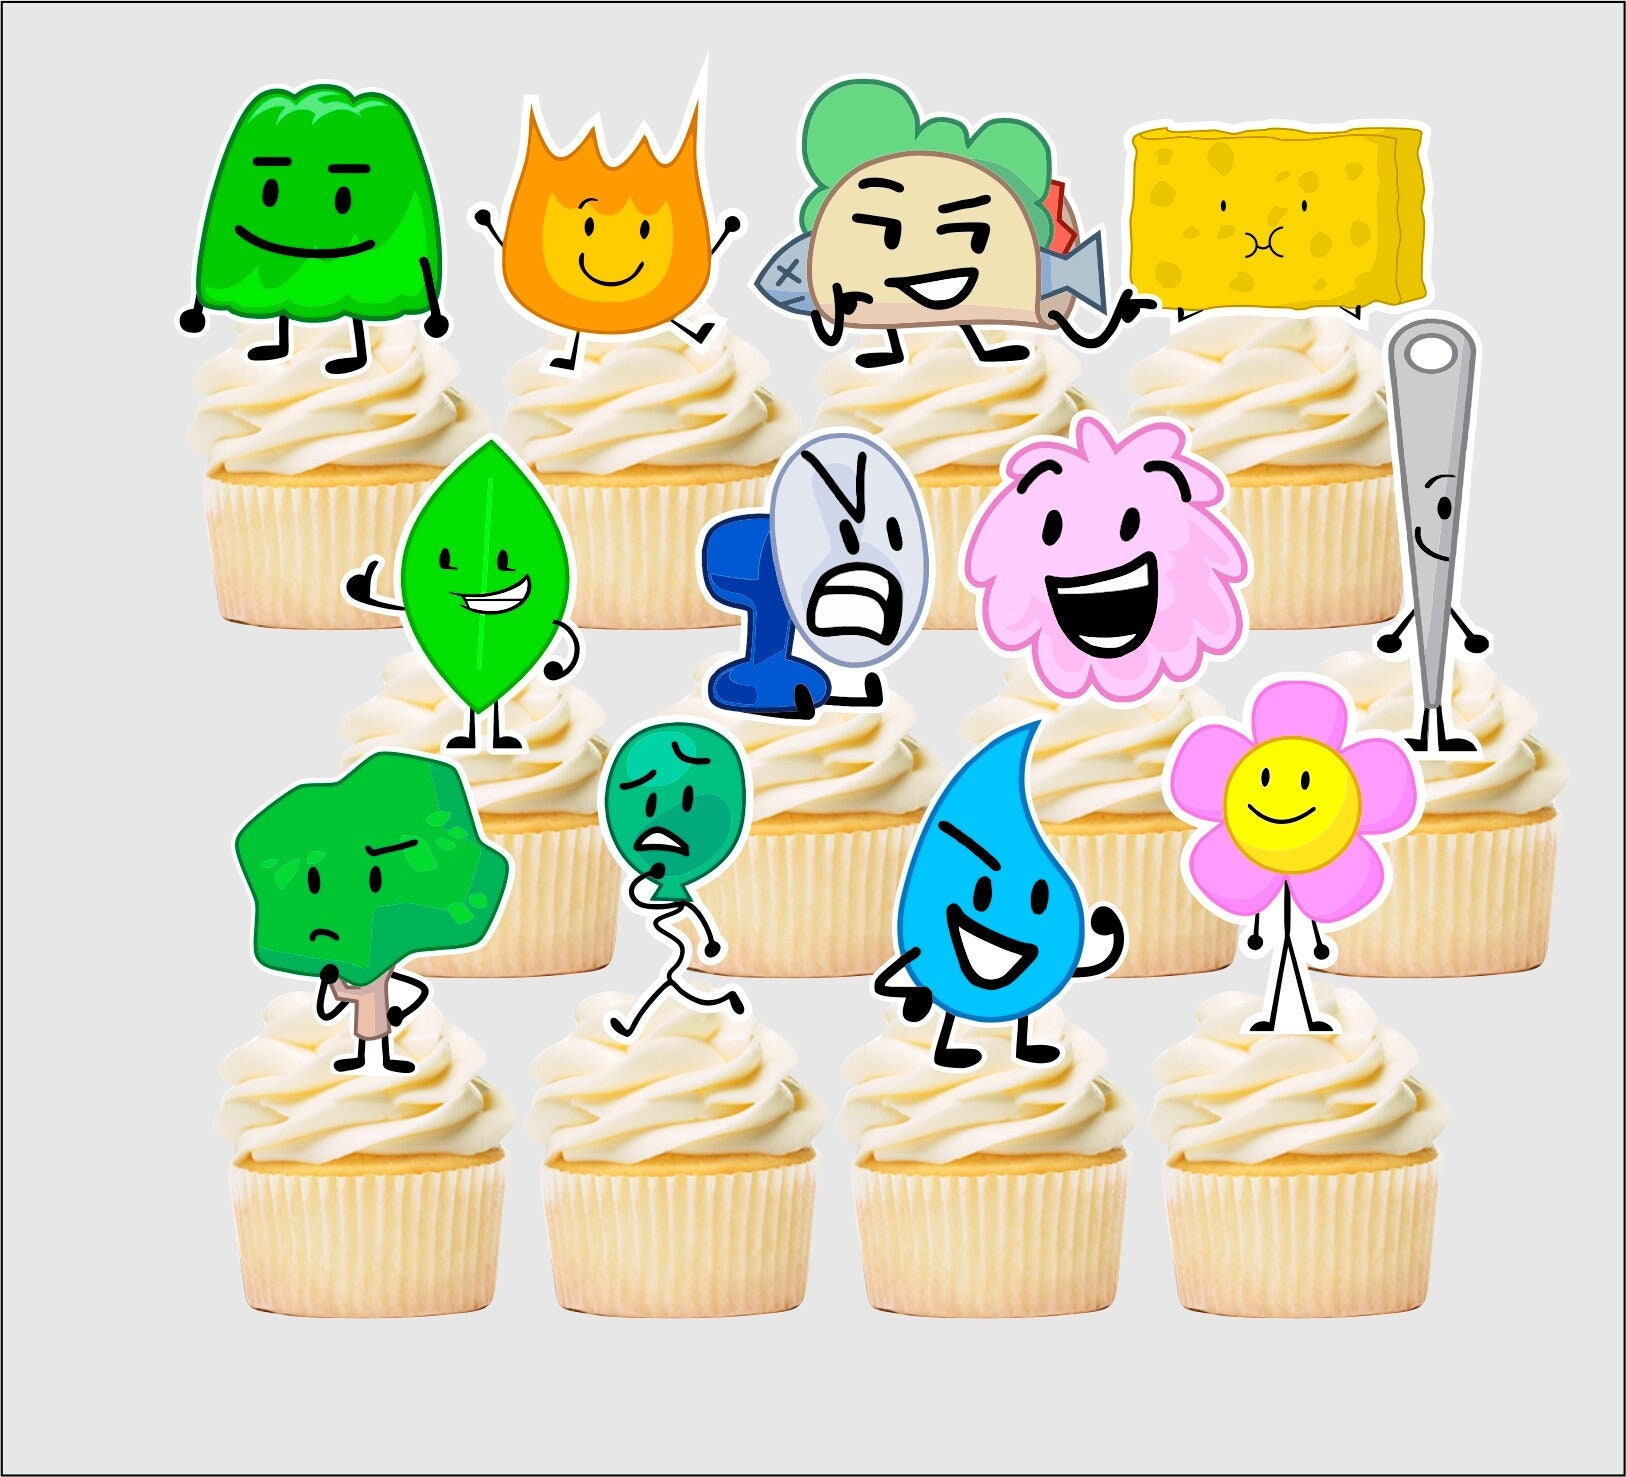 Cake From Battle for BFDI Plush Toy the Power of Two IDFB DFB 